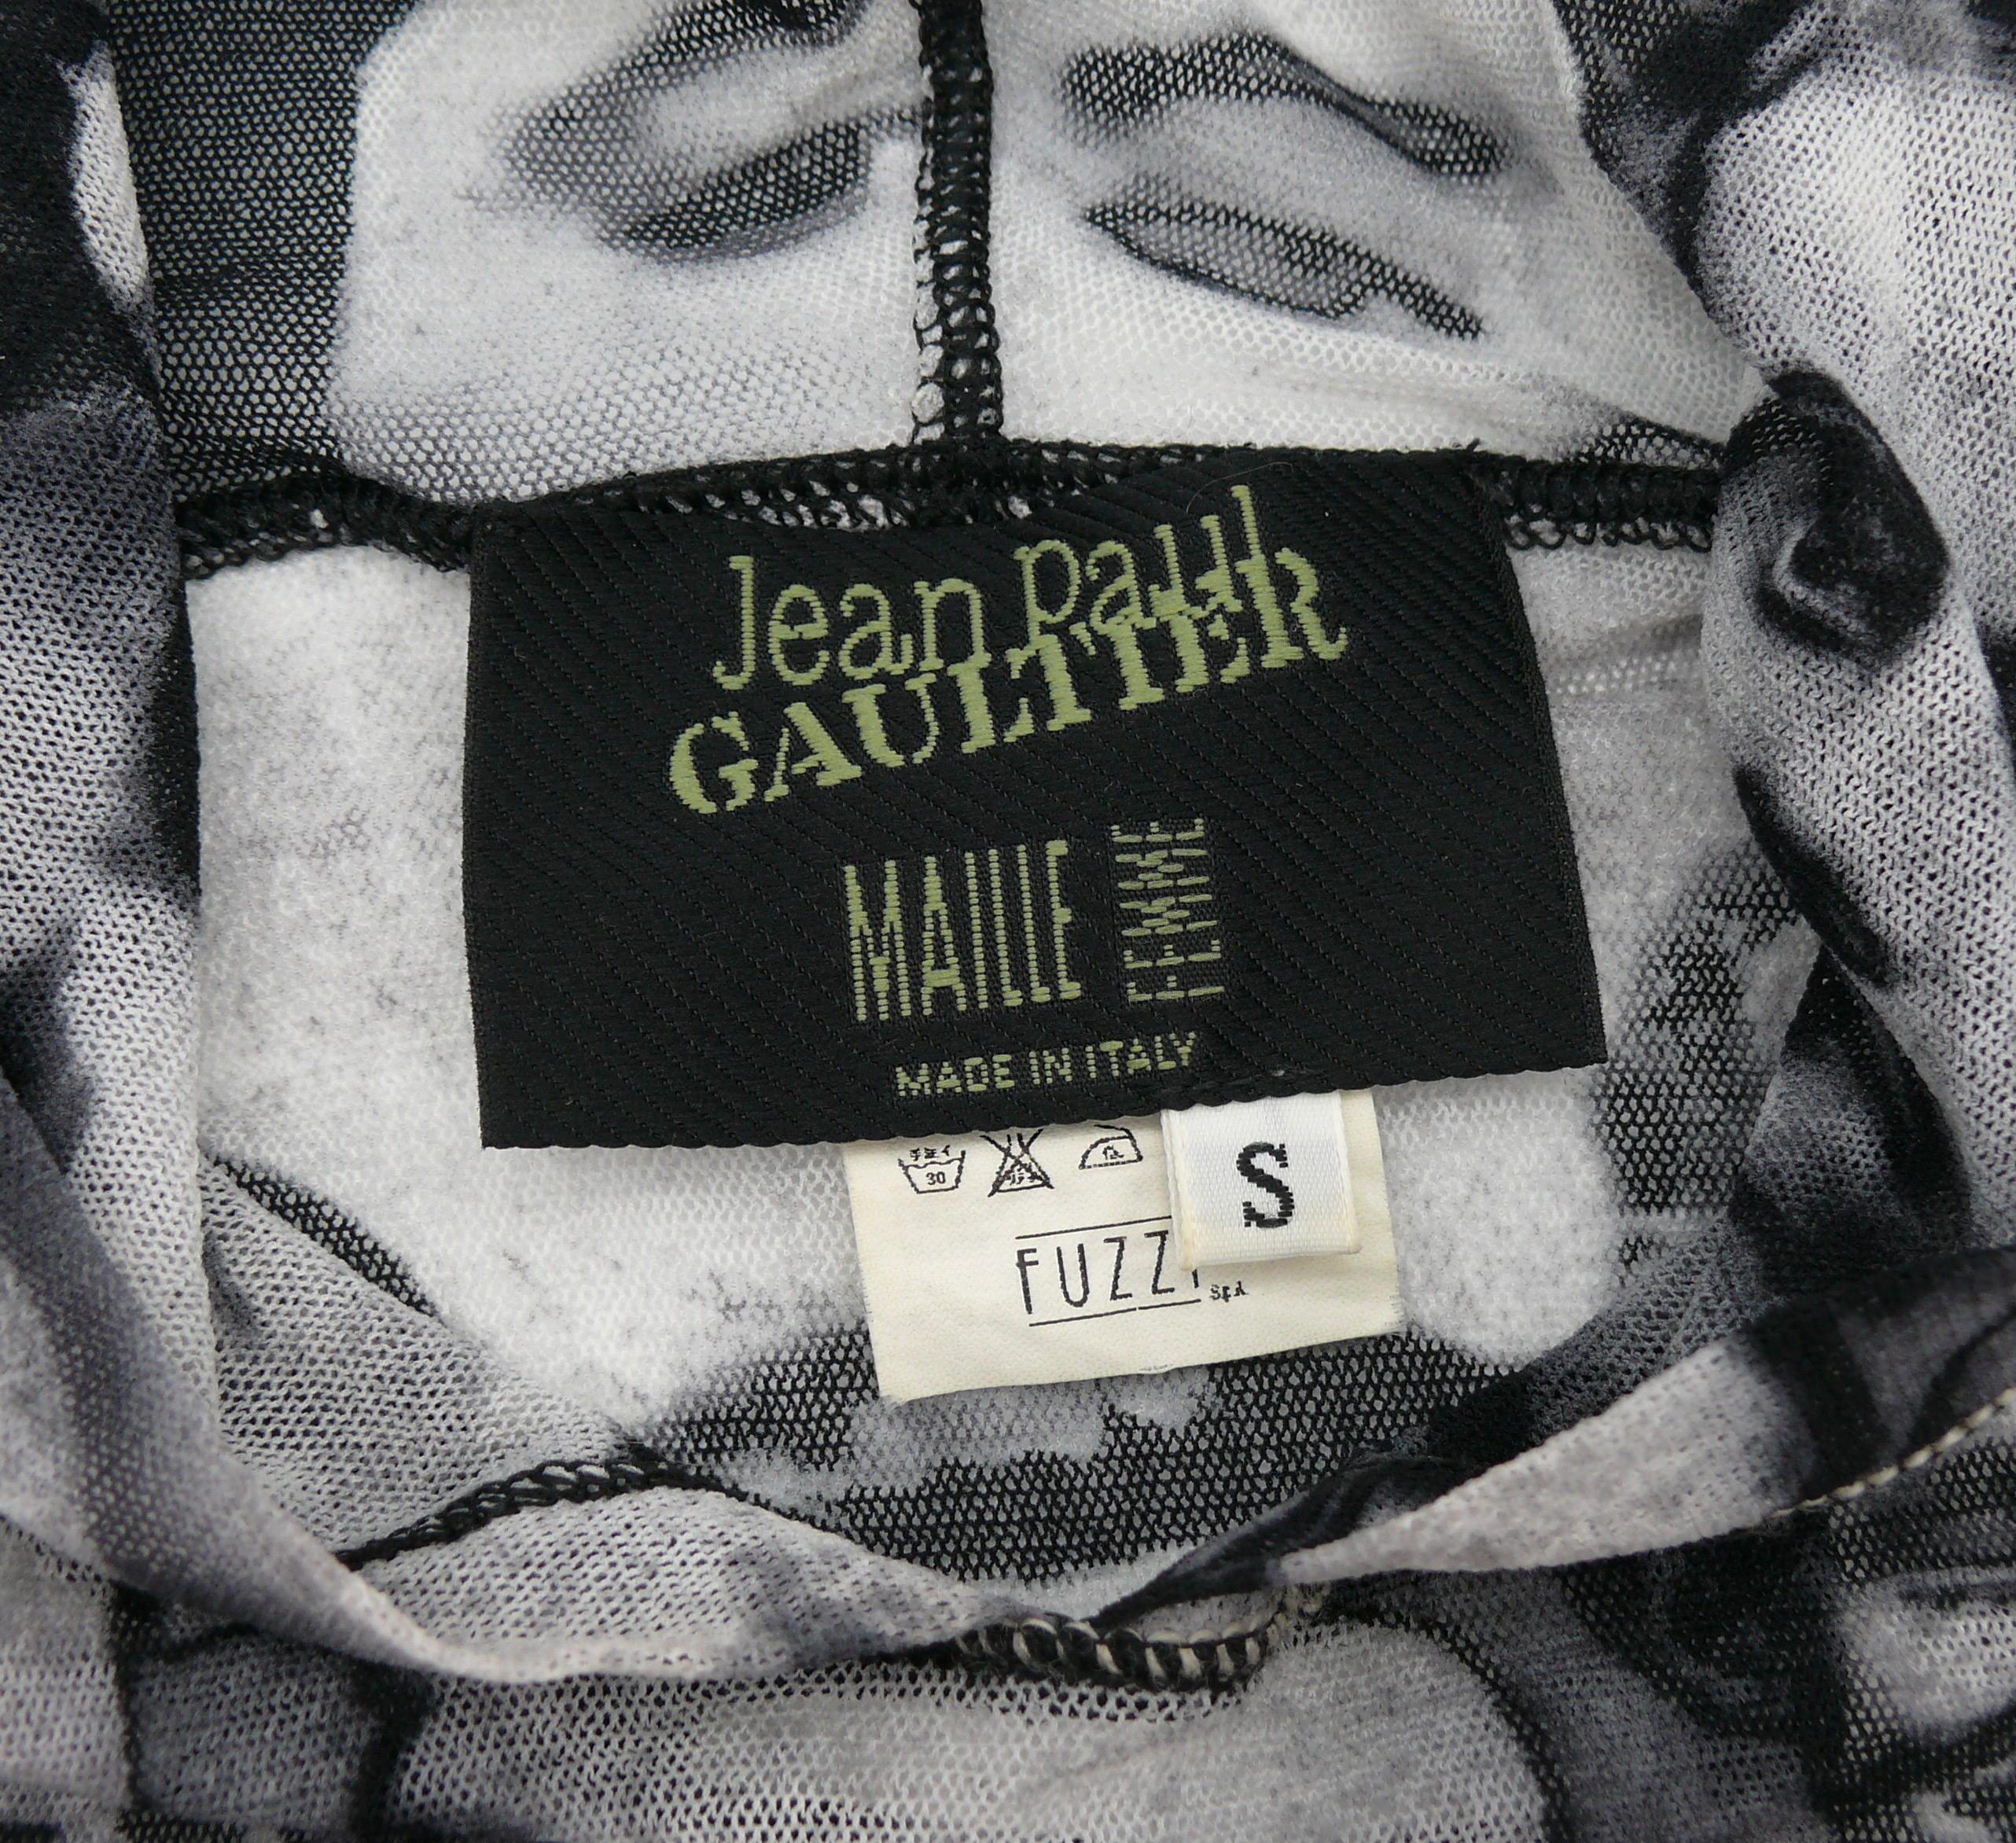 Jean Paul Gaultier Maille Vintage Iconic Faces Print Mesh Hooded Top Size S For Sale 6